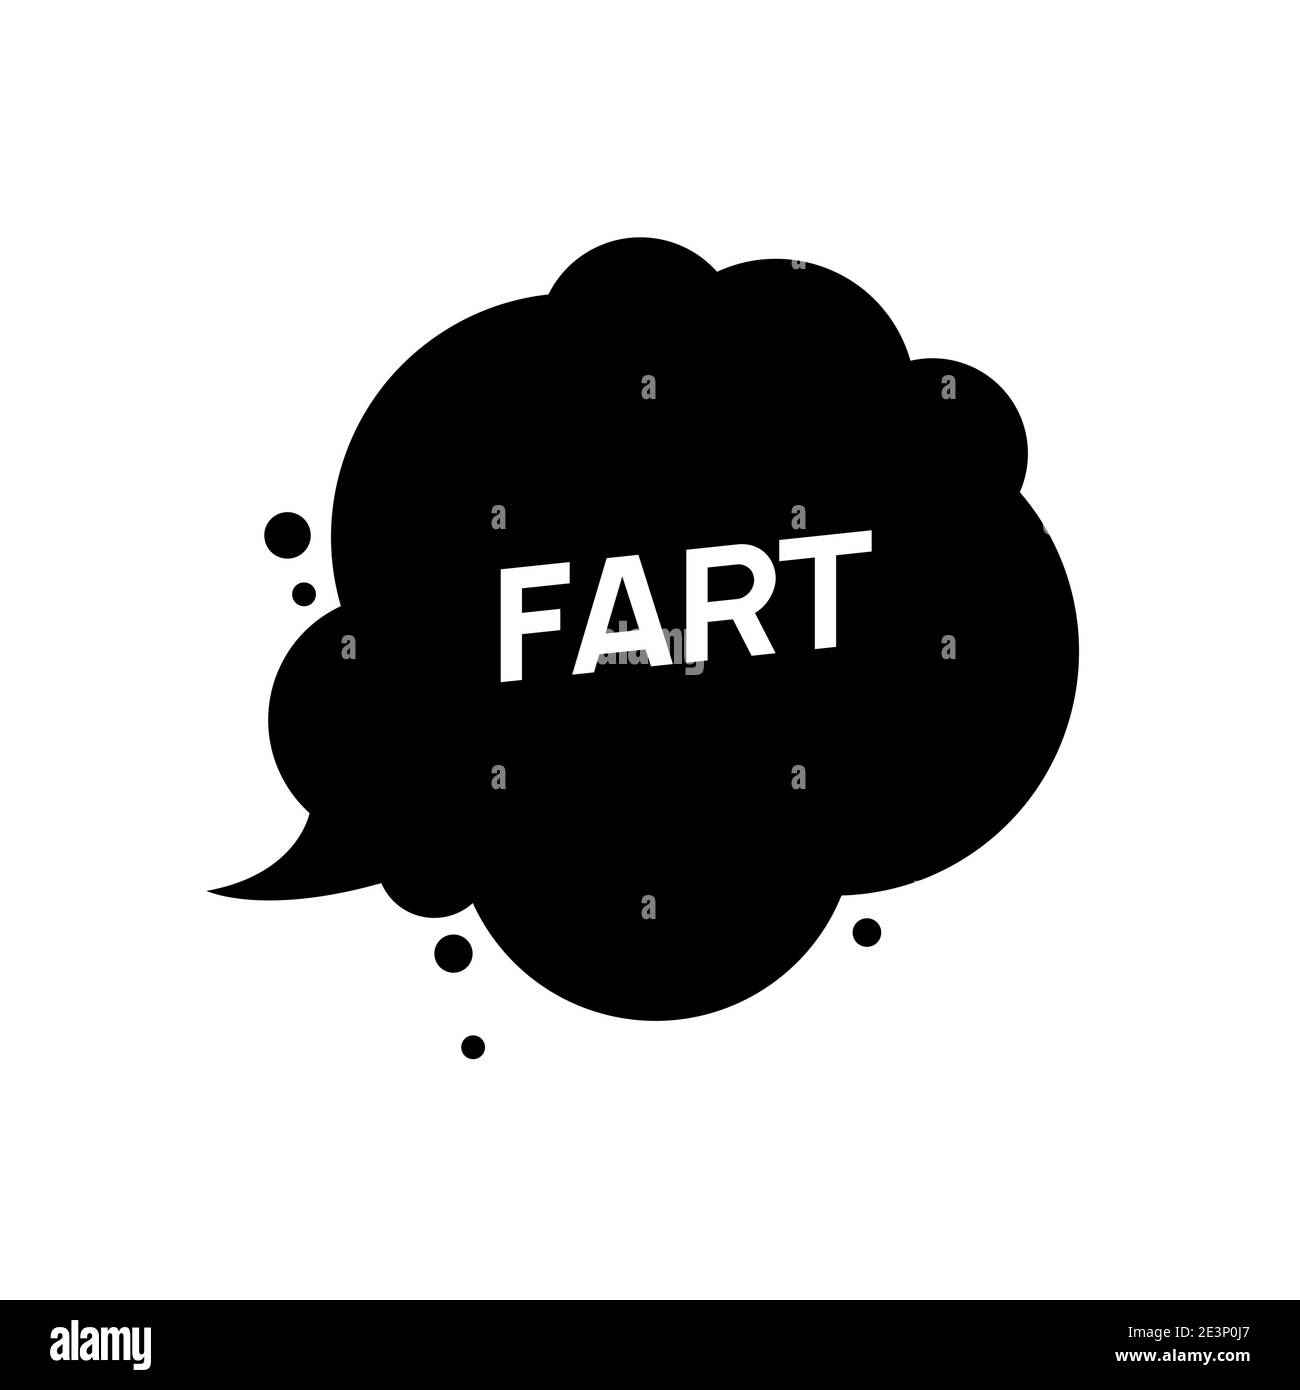 Fart smoke cartoon icon. Stink fart bad smell green gas cloud Stock Vector